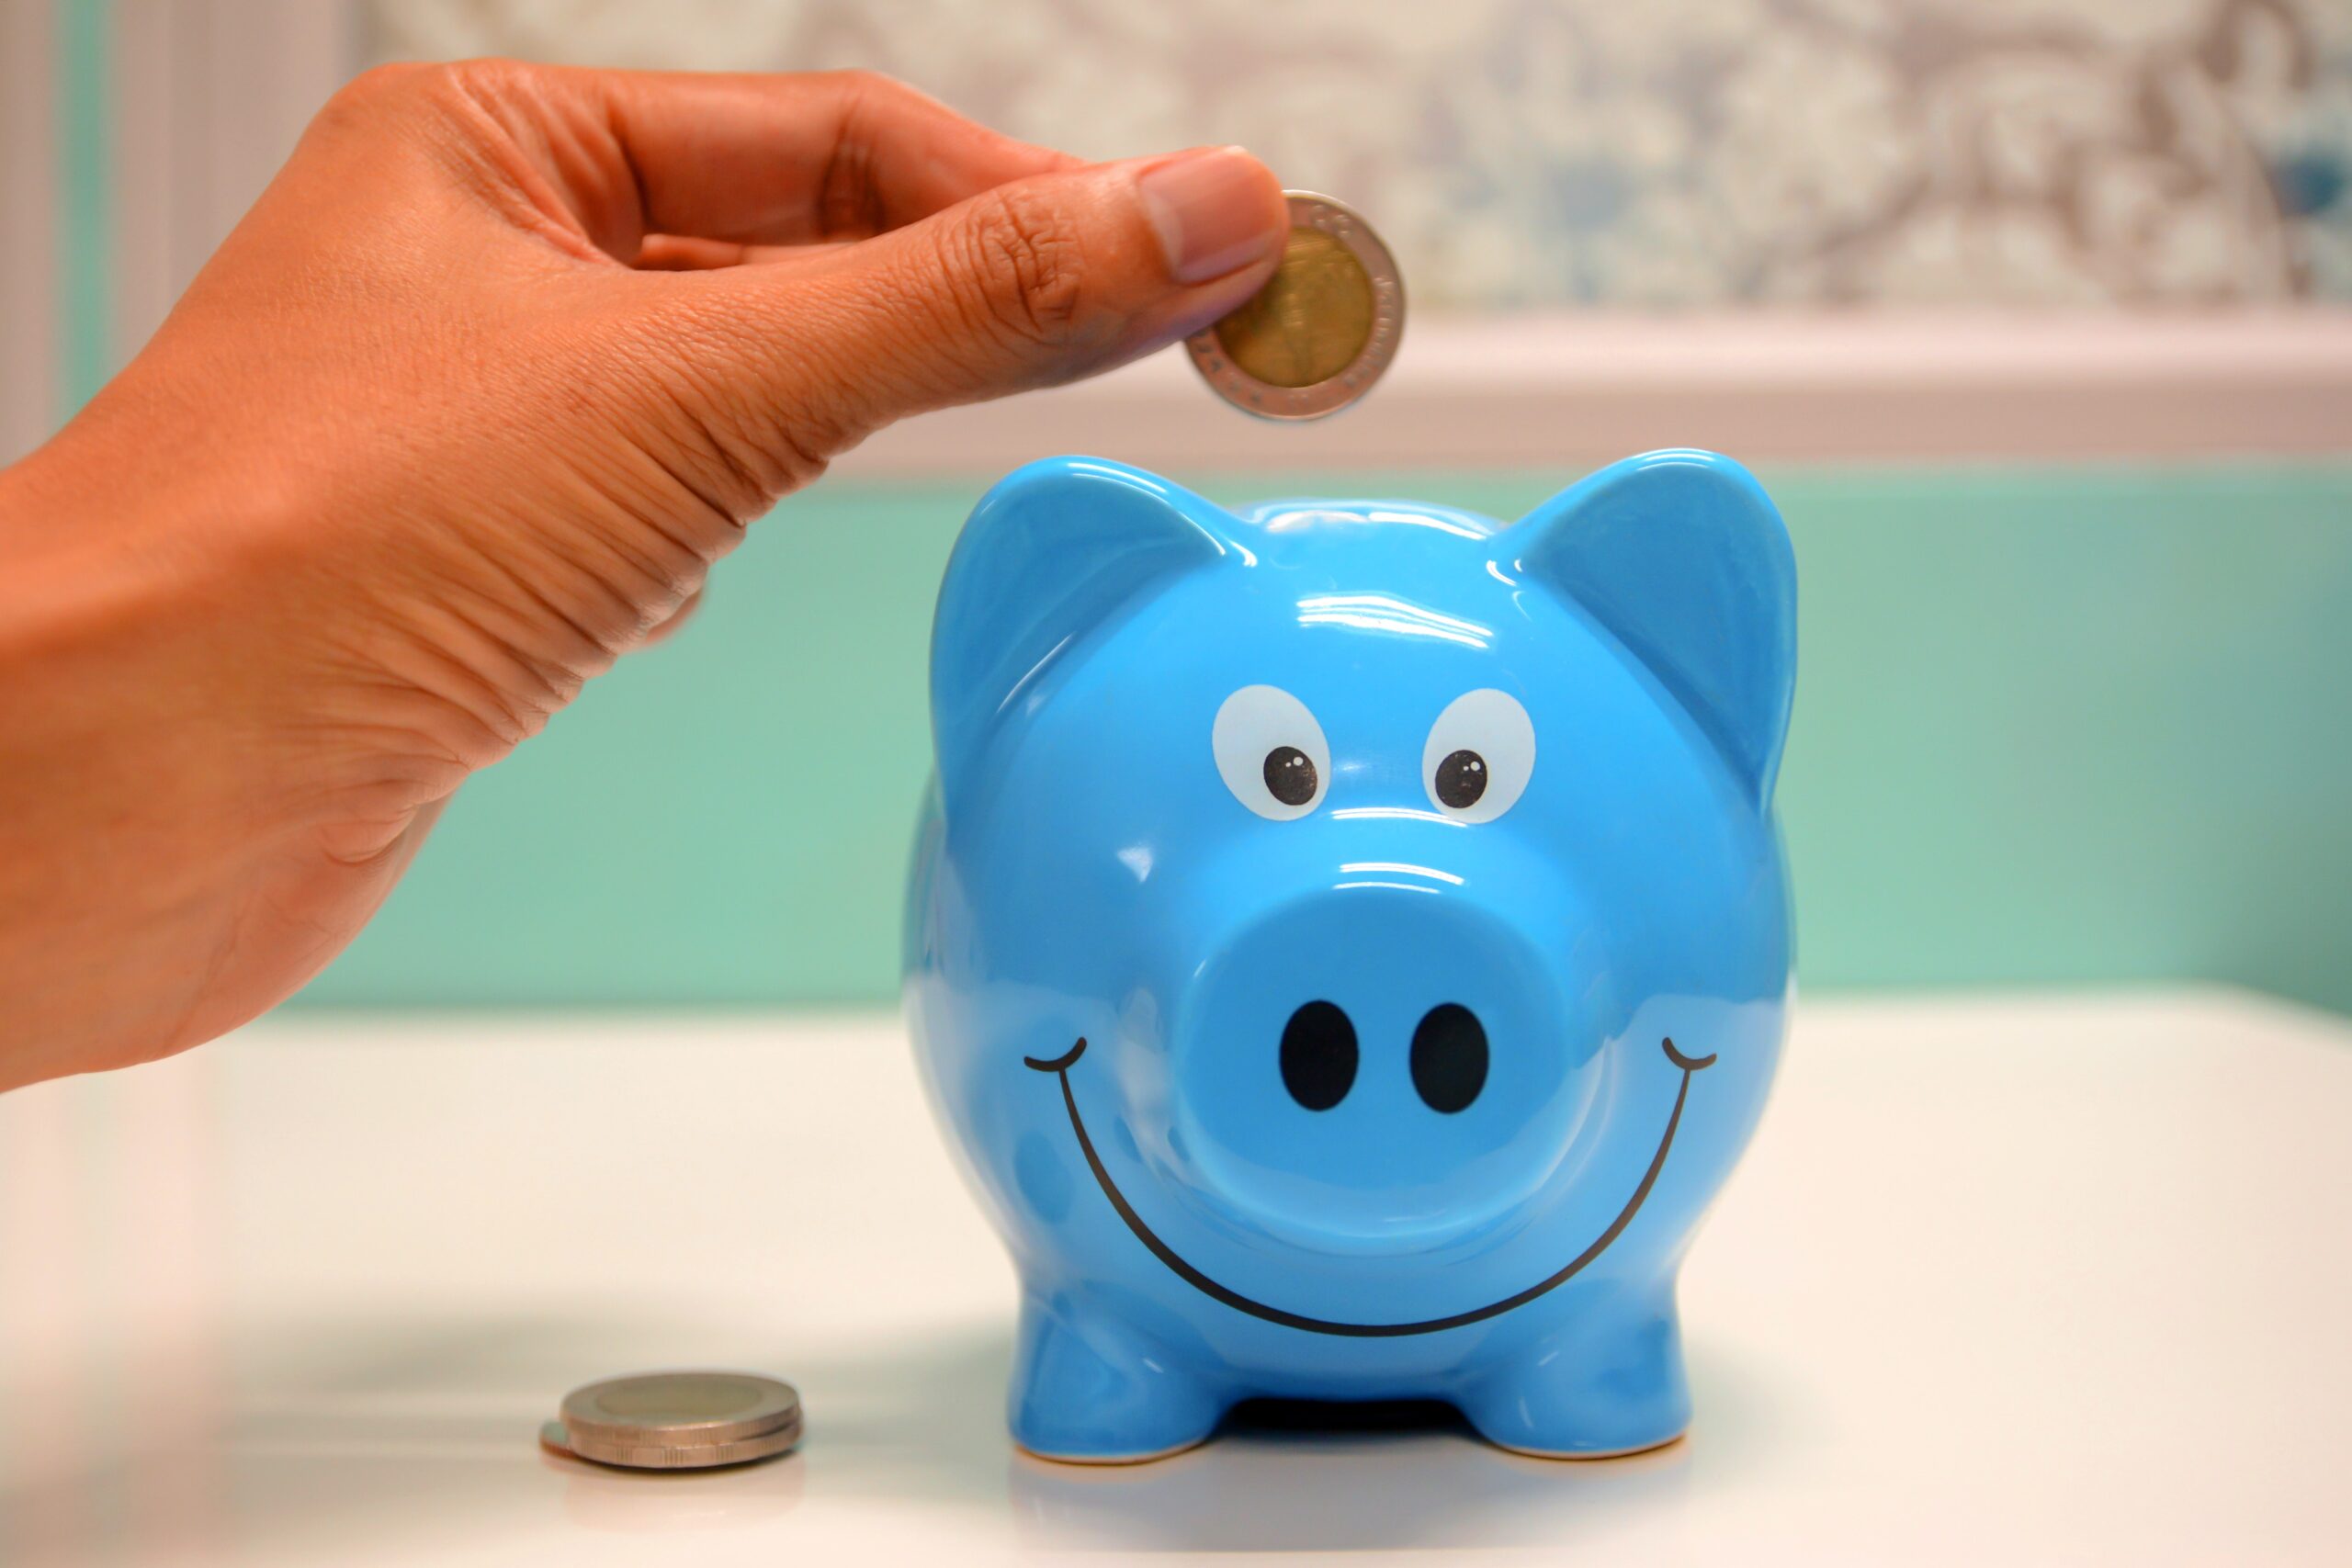 A hand is dropping a coin into a blue piggy bank